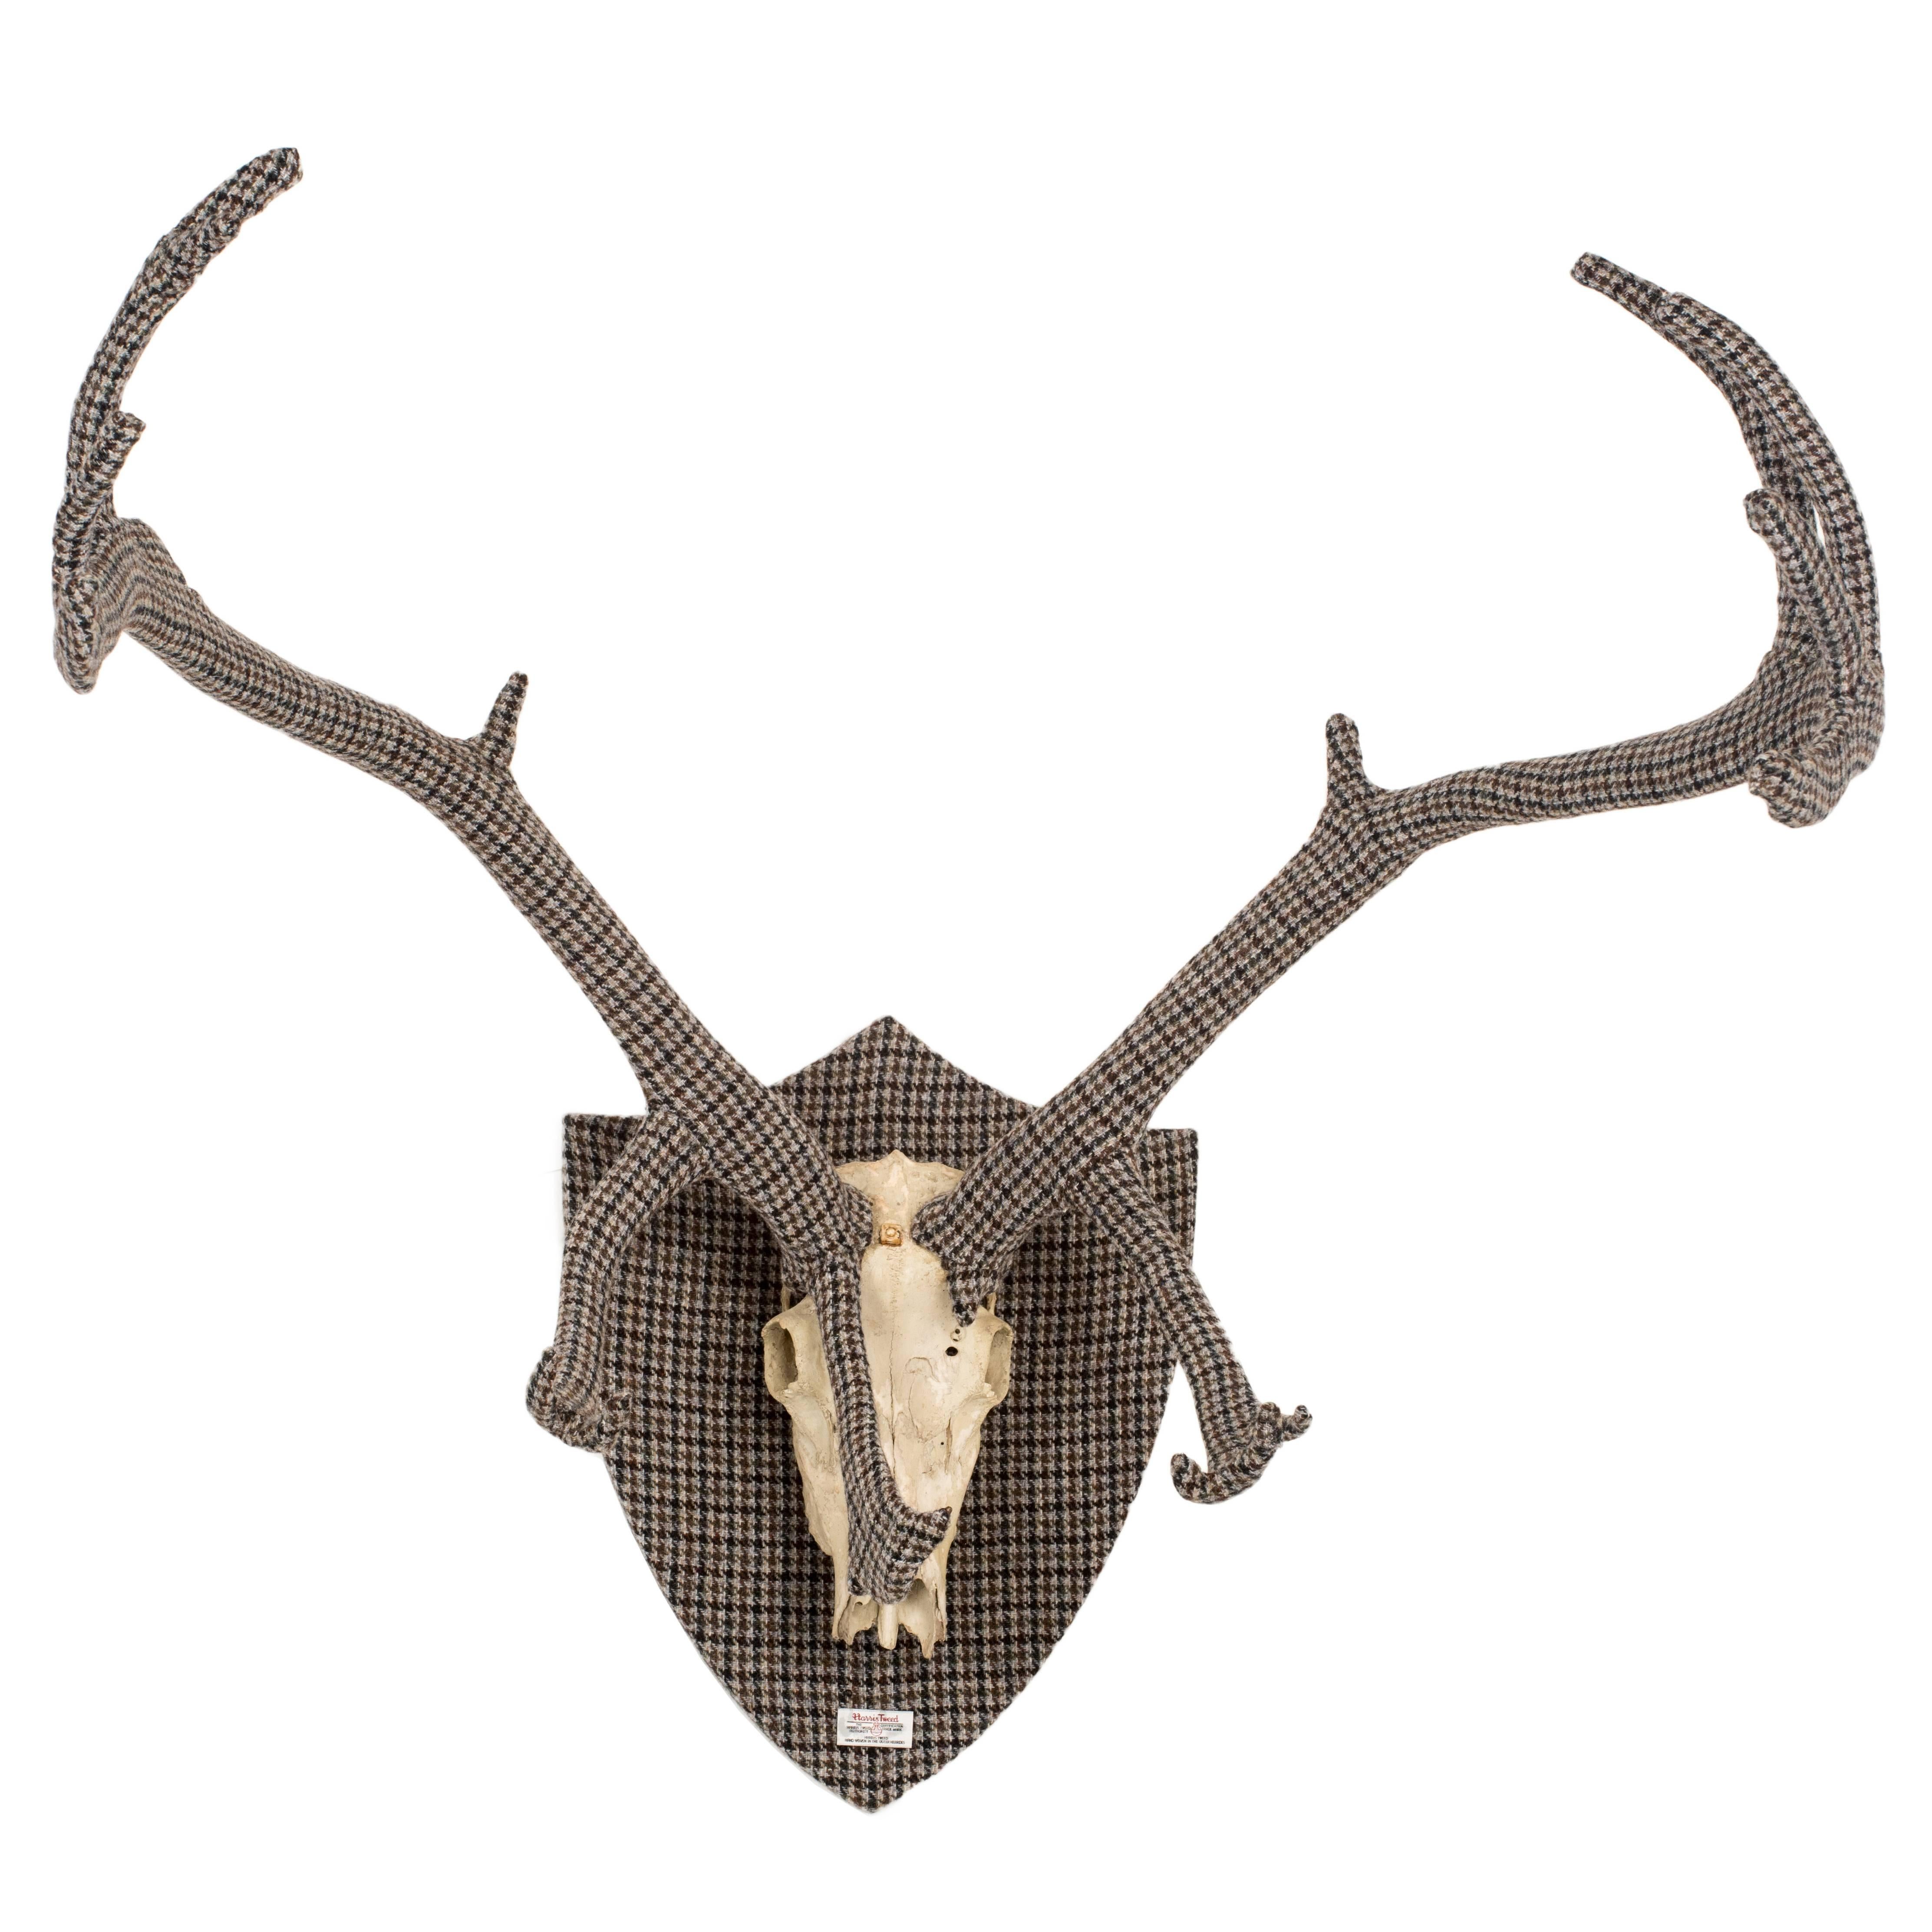 Impressive set of Scottish deer antlers painstakingly hand-sewn and wrapped in traditional Harris Tweed with the obligatory Harris Tweed authenticity label and gold coloured tooth mounted of crest wall plaque.

Amazing statement centre piece to